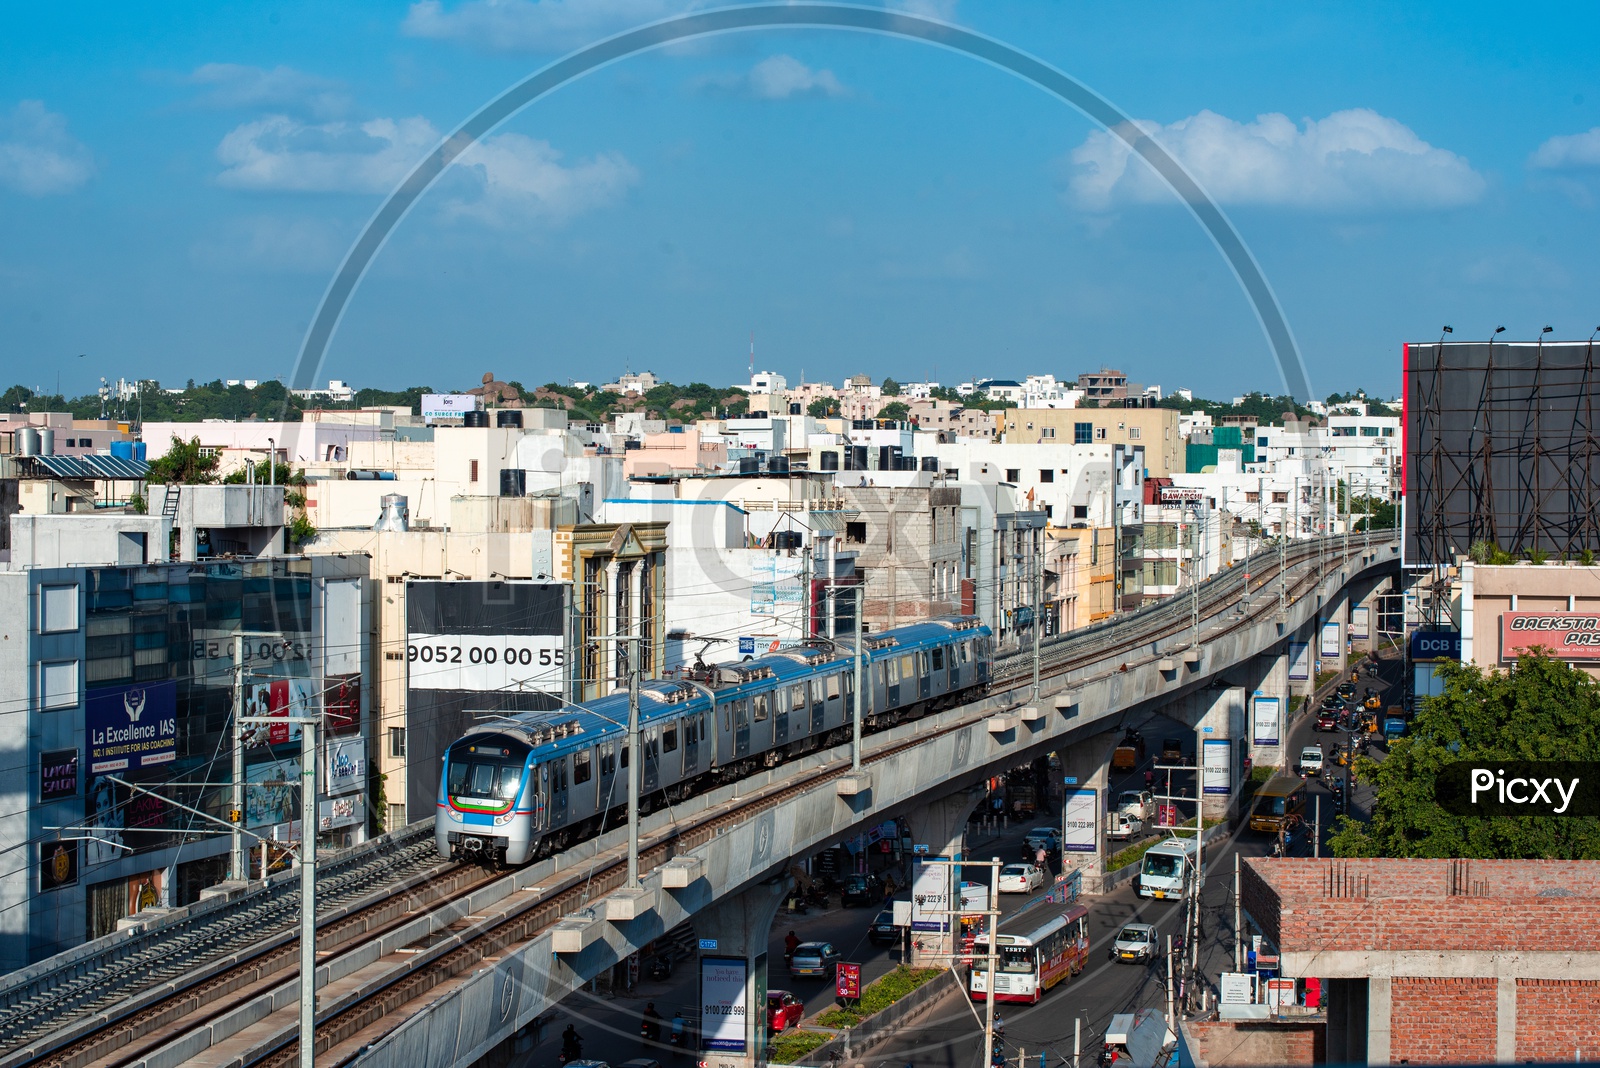 Hyderabad Metro Train running On Tracks  With High rise buildings in Background